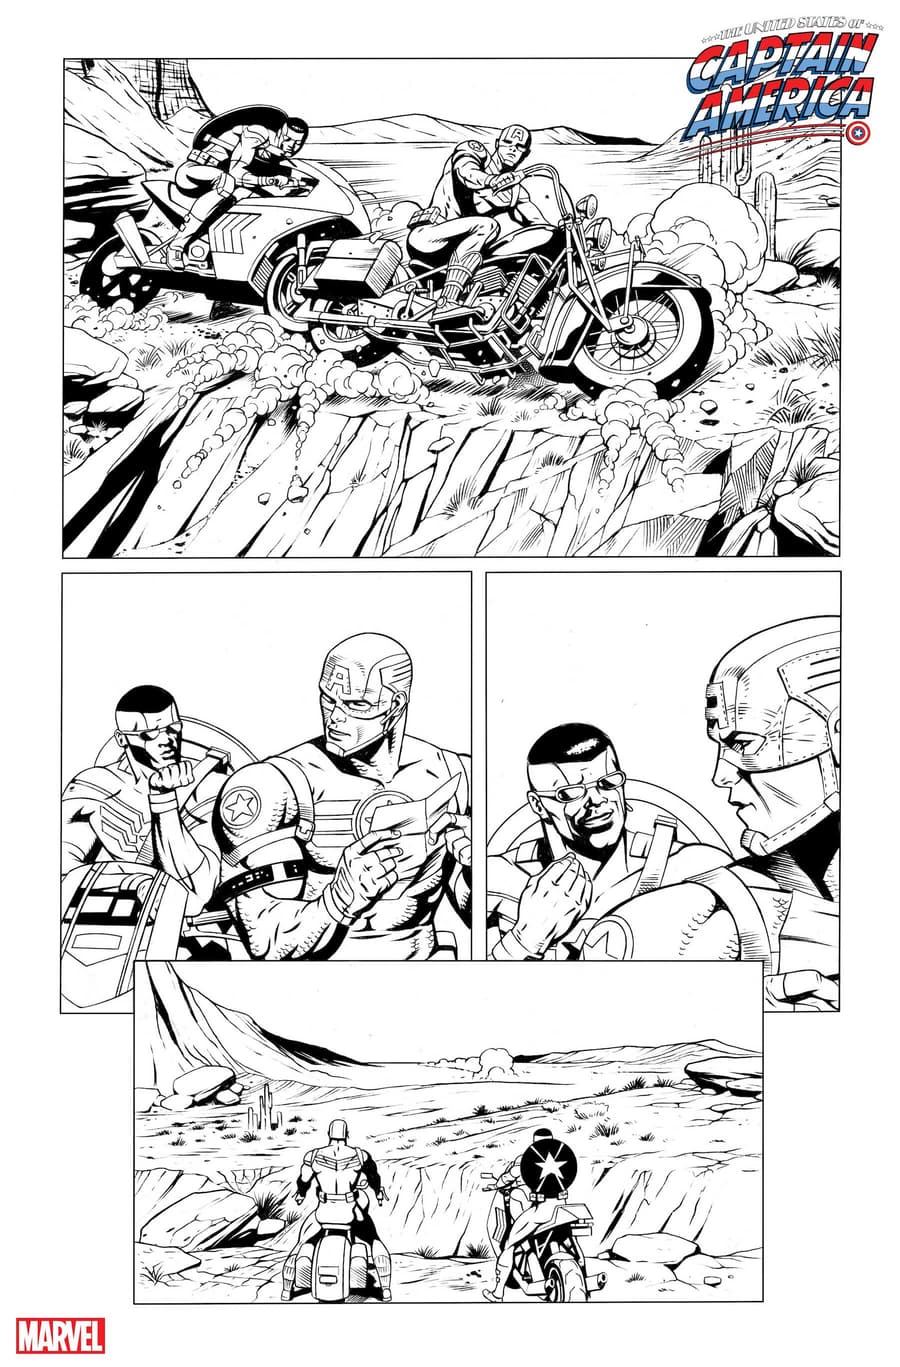 THE UNITED STATES OF CAPTAIN AMERICA #3 preview inks by Dale Eaglesham